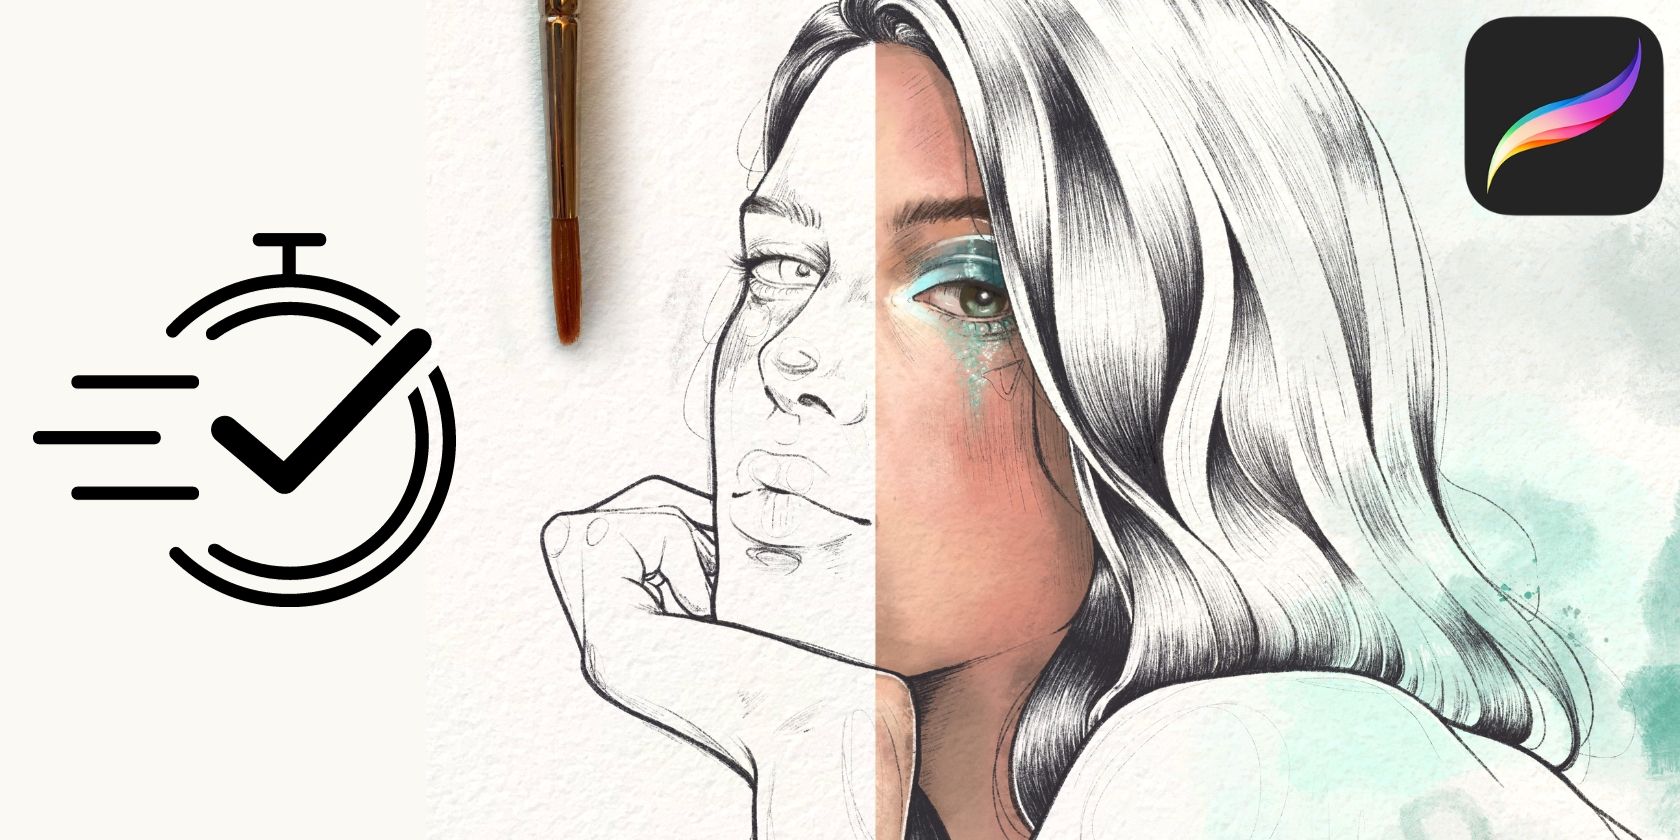 An illustration of a girl's face, half sketched and half painted, next to a video icon and procreate app icon.